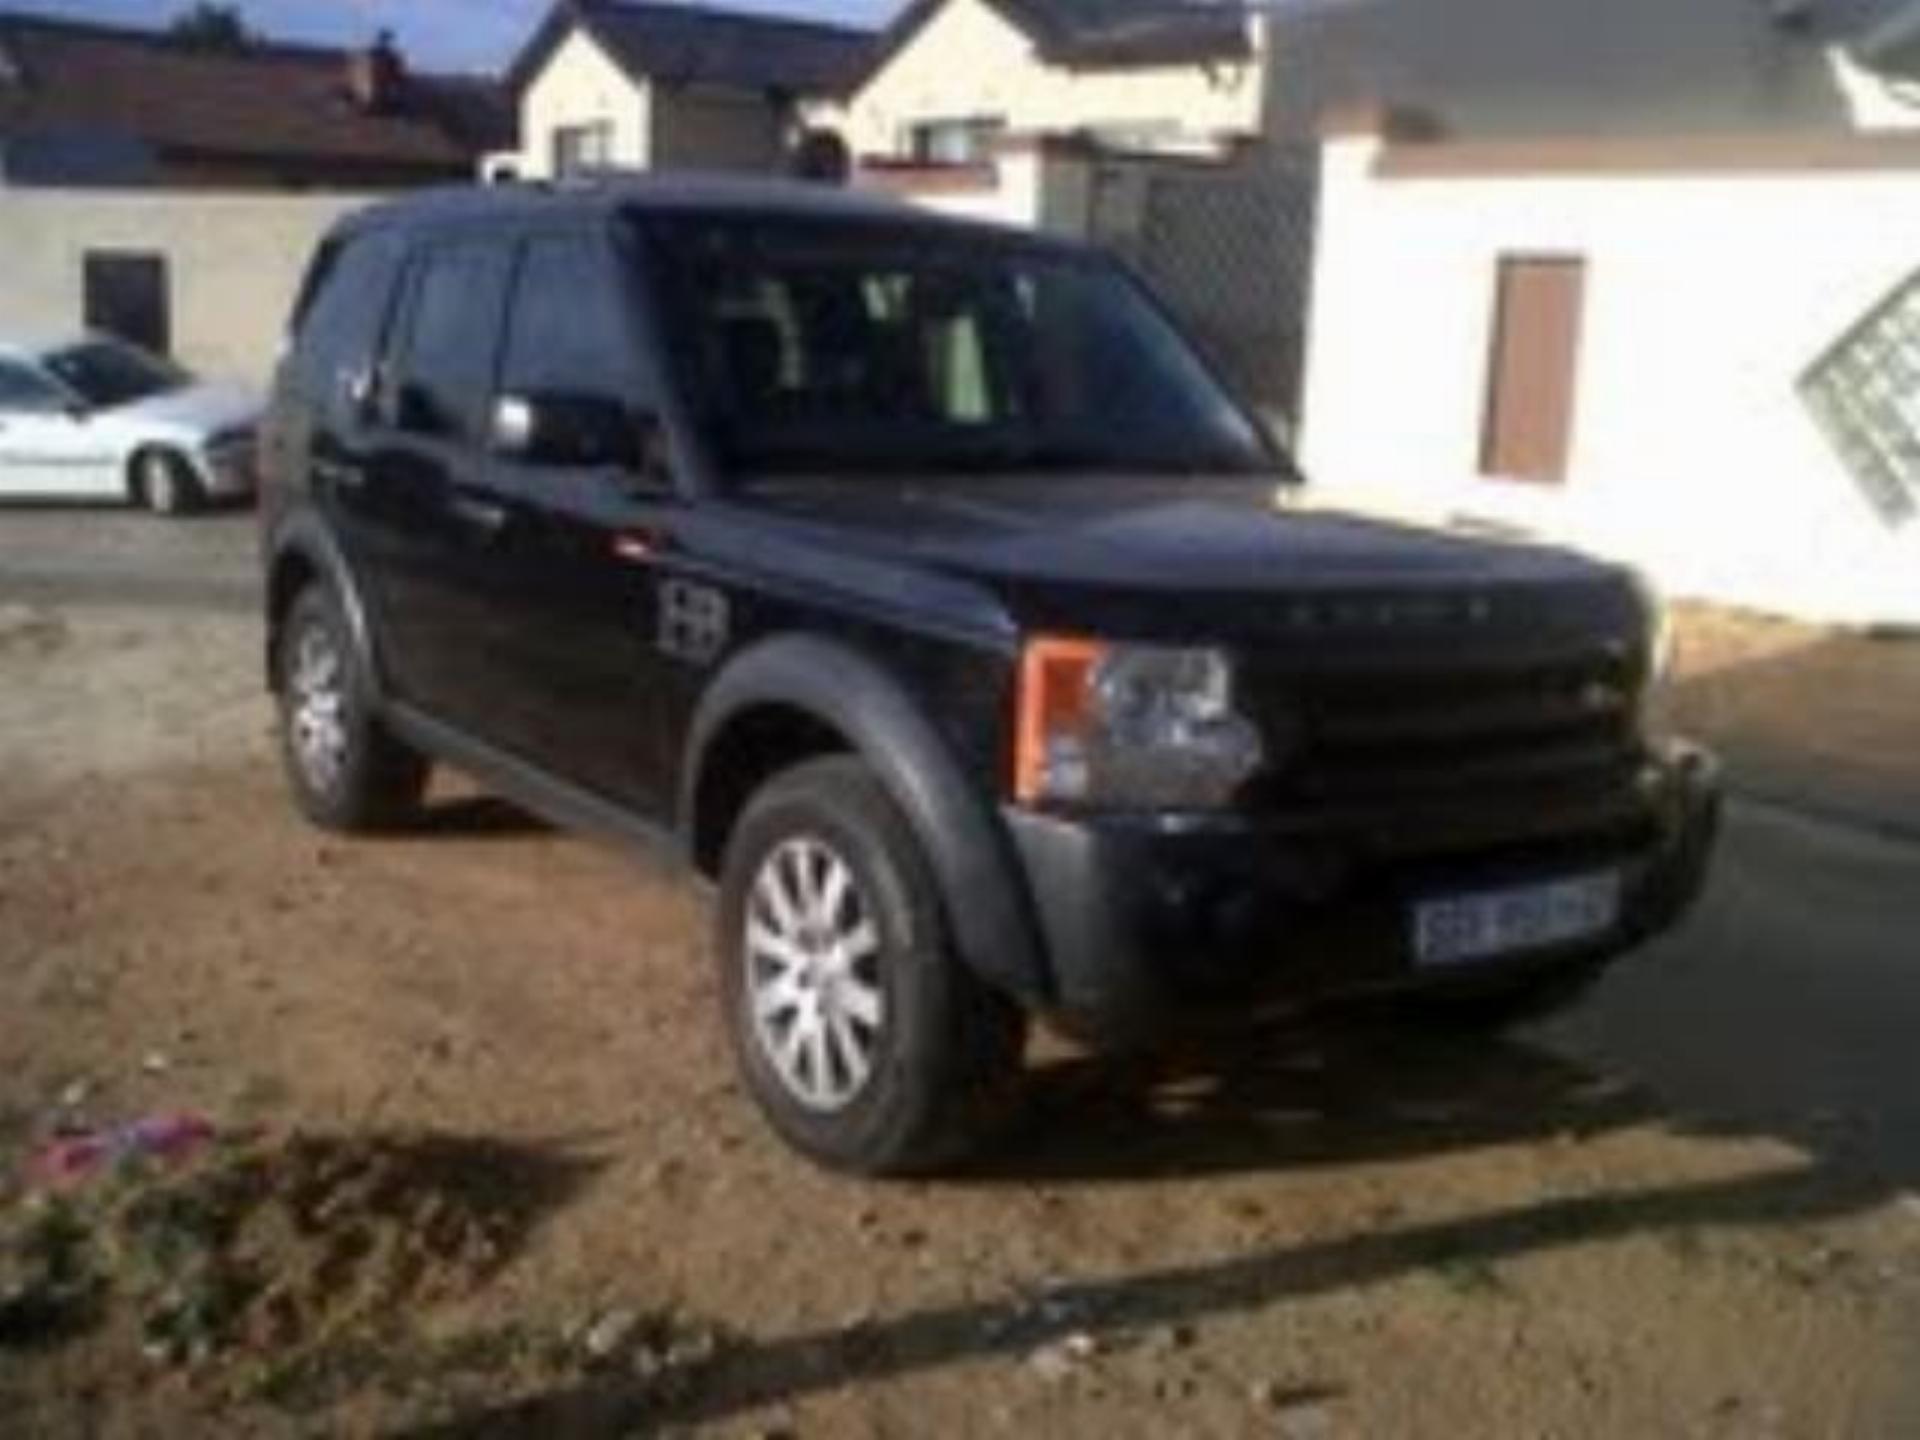 Used Land Rover Discovery 3 V8 SE 2005 on auction PV1004661